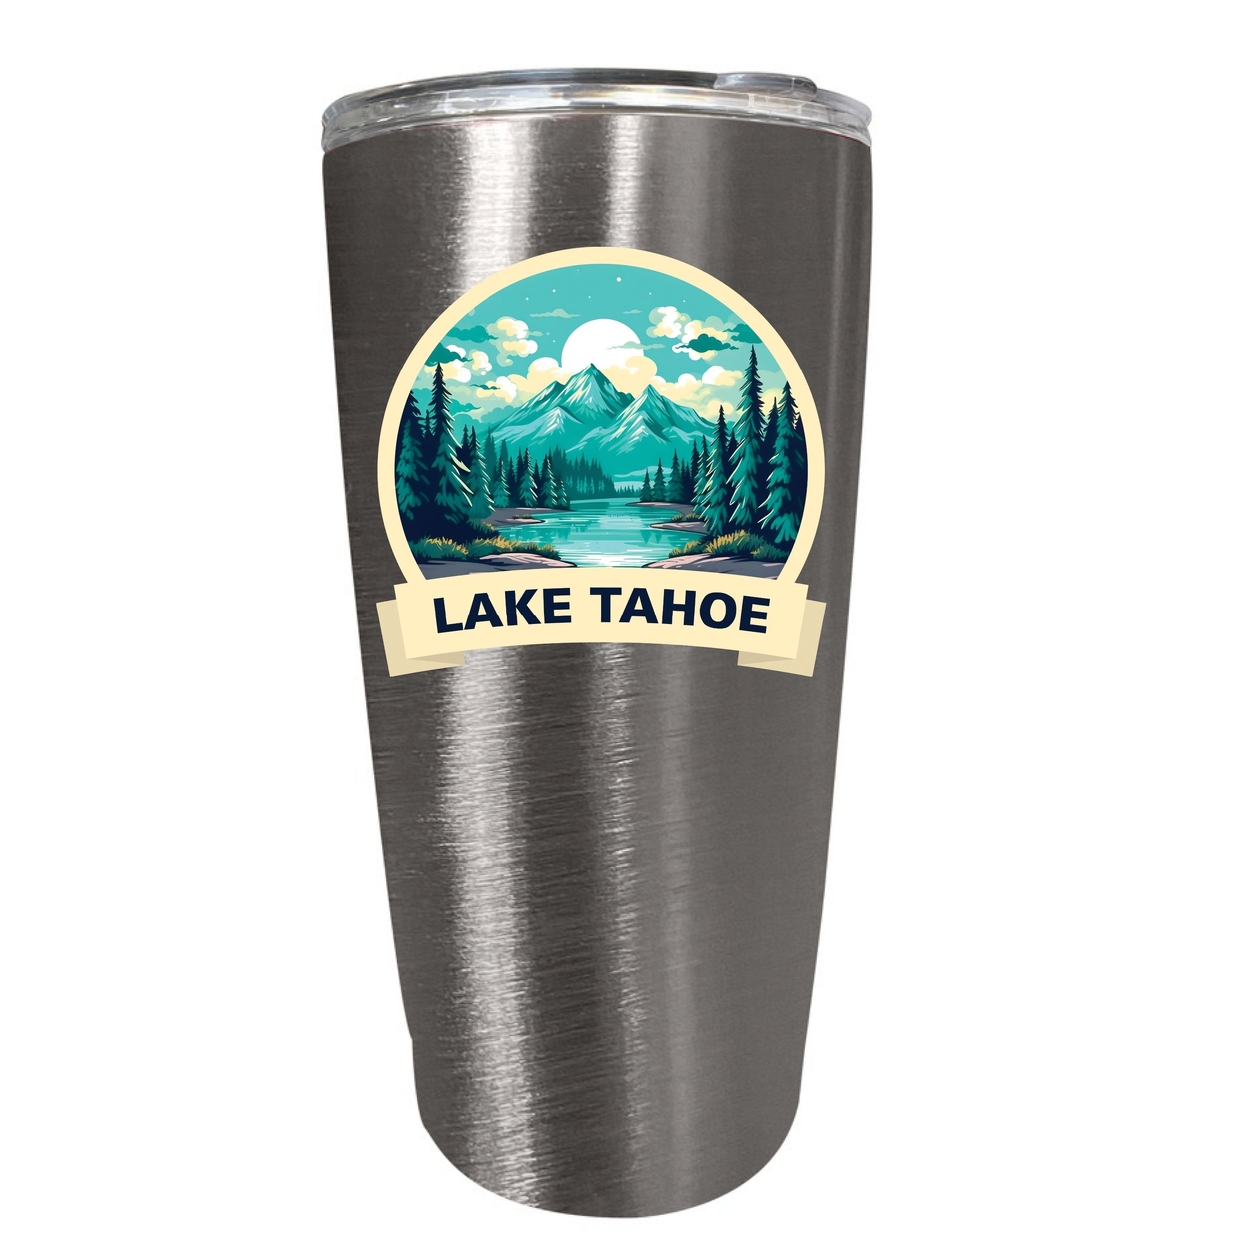 Lake Tahoe California Souvenir 16 Oz Stainless Steel Insulated Tumbler - Red,,4-Pack